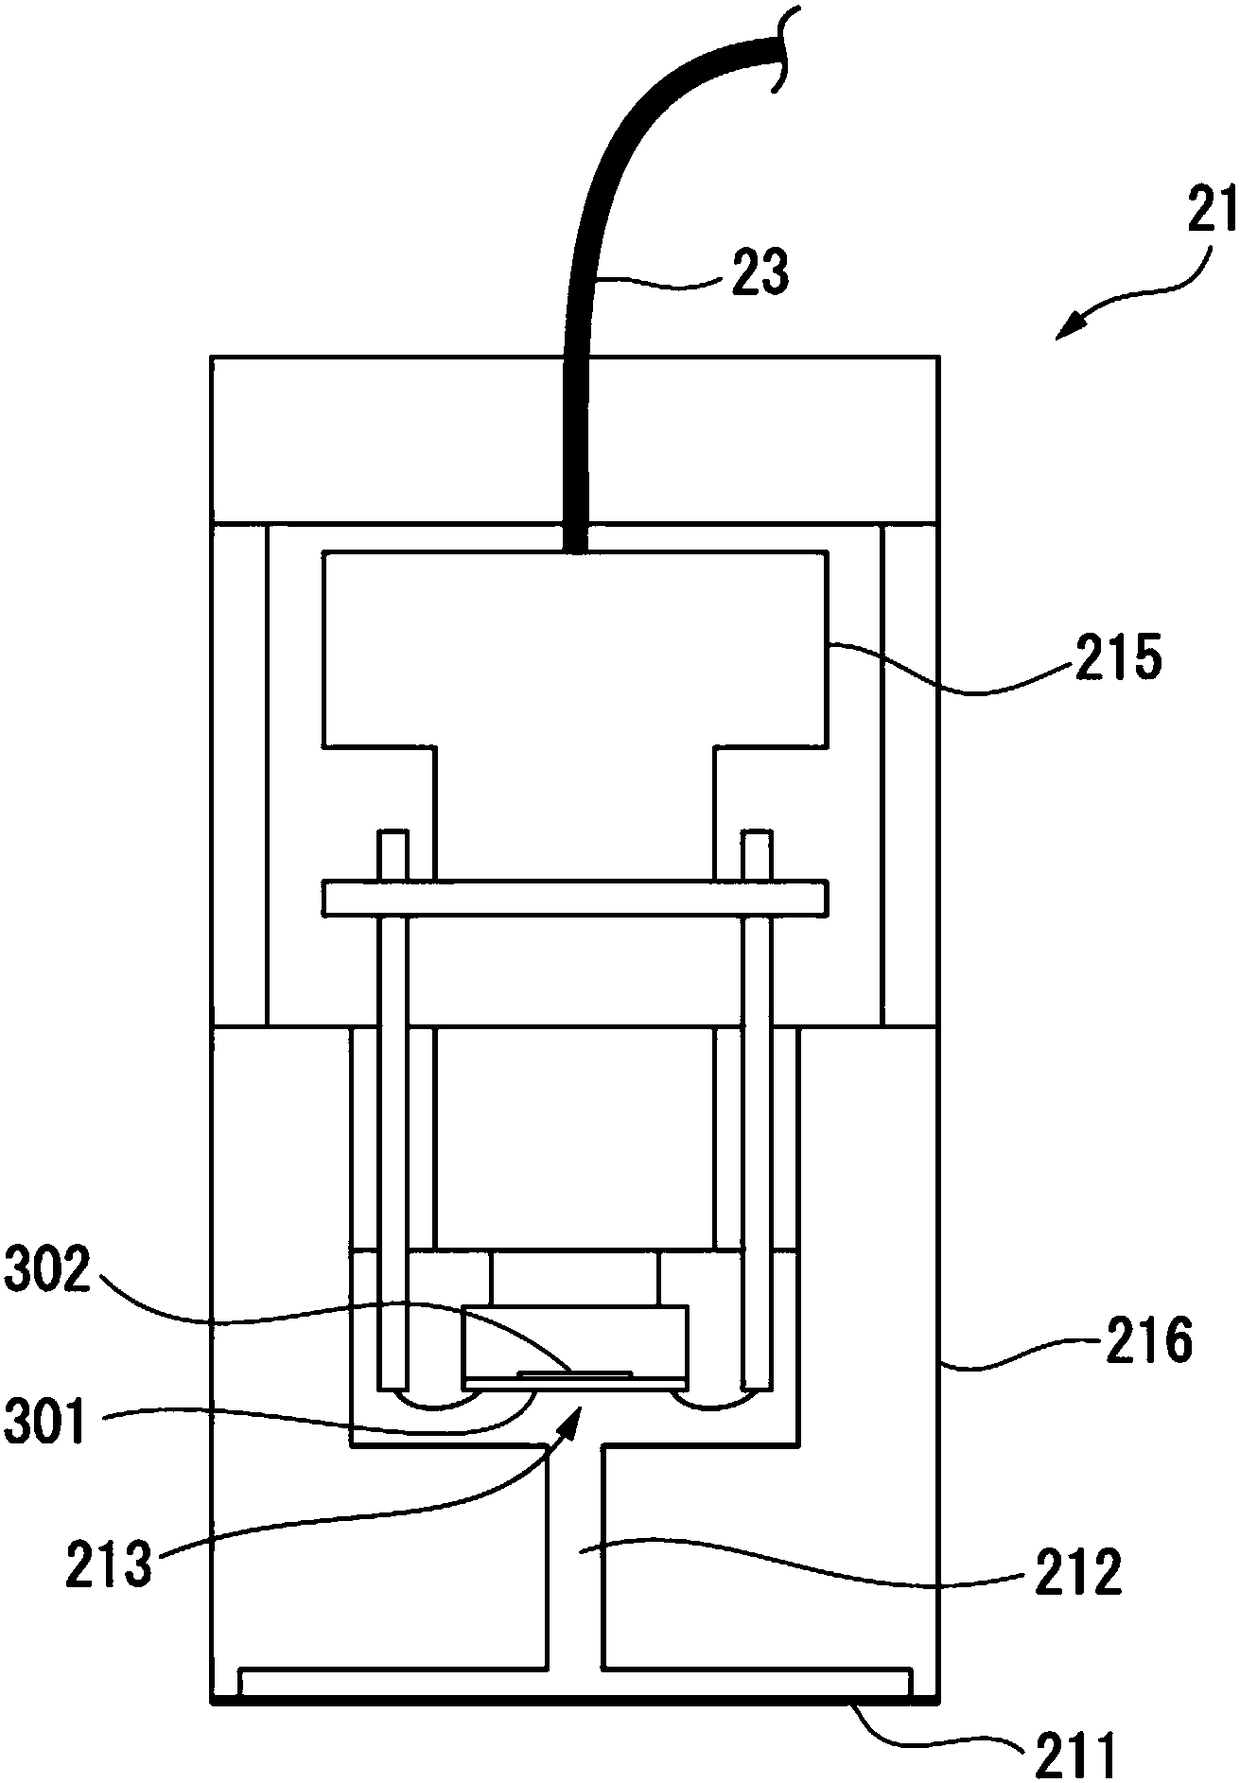 Water level gauge, water pressure sensor device, and water level measurement system